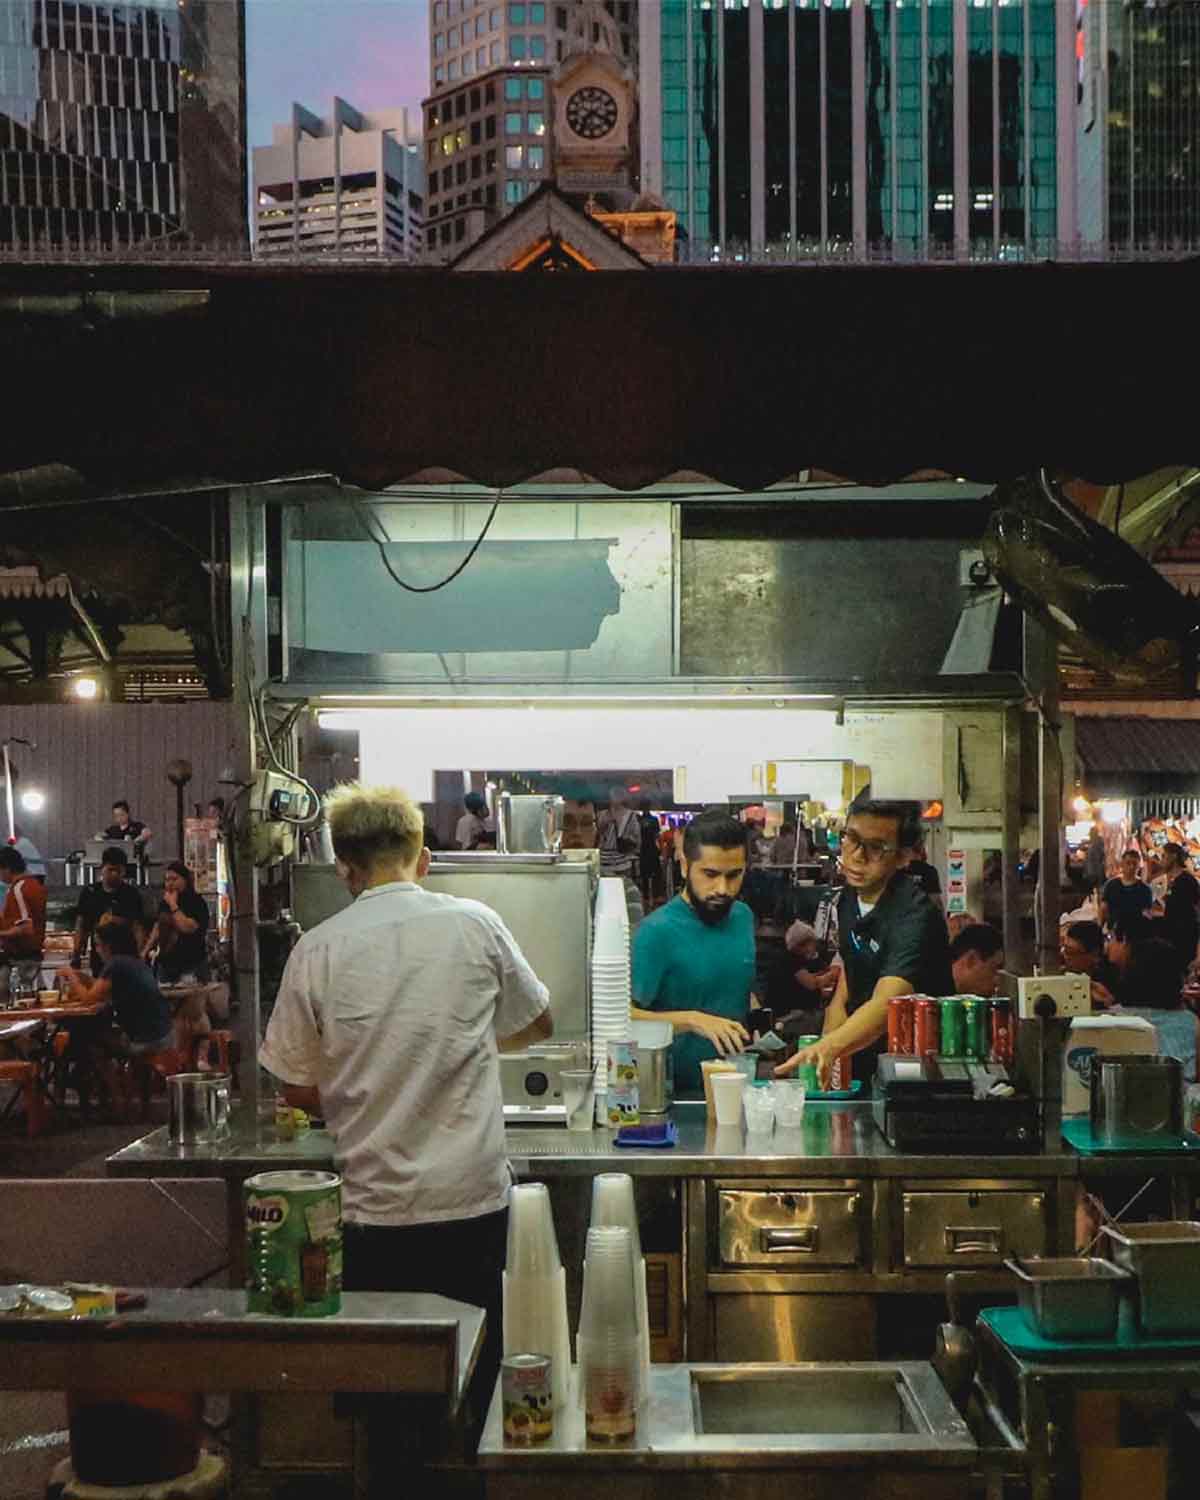 An energetic photo of street food vendors in Singapore.